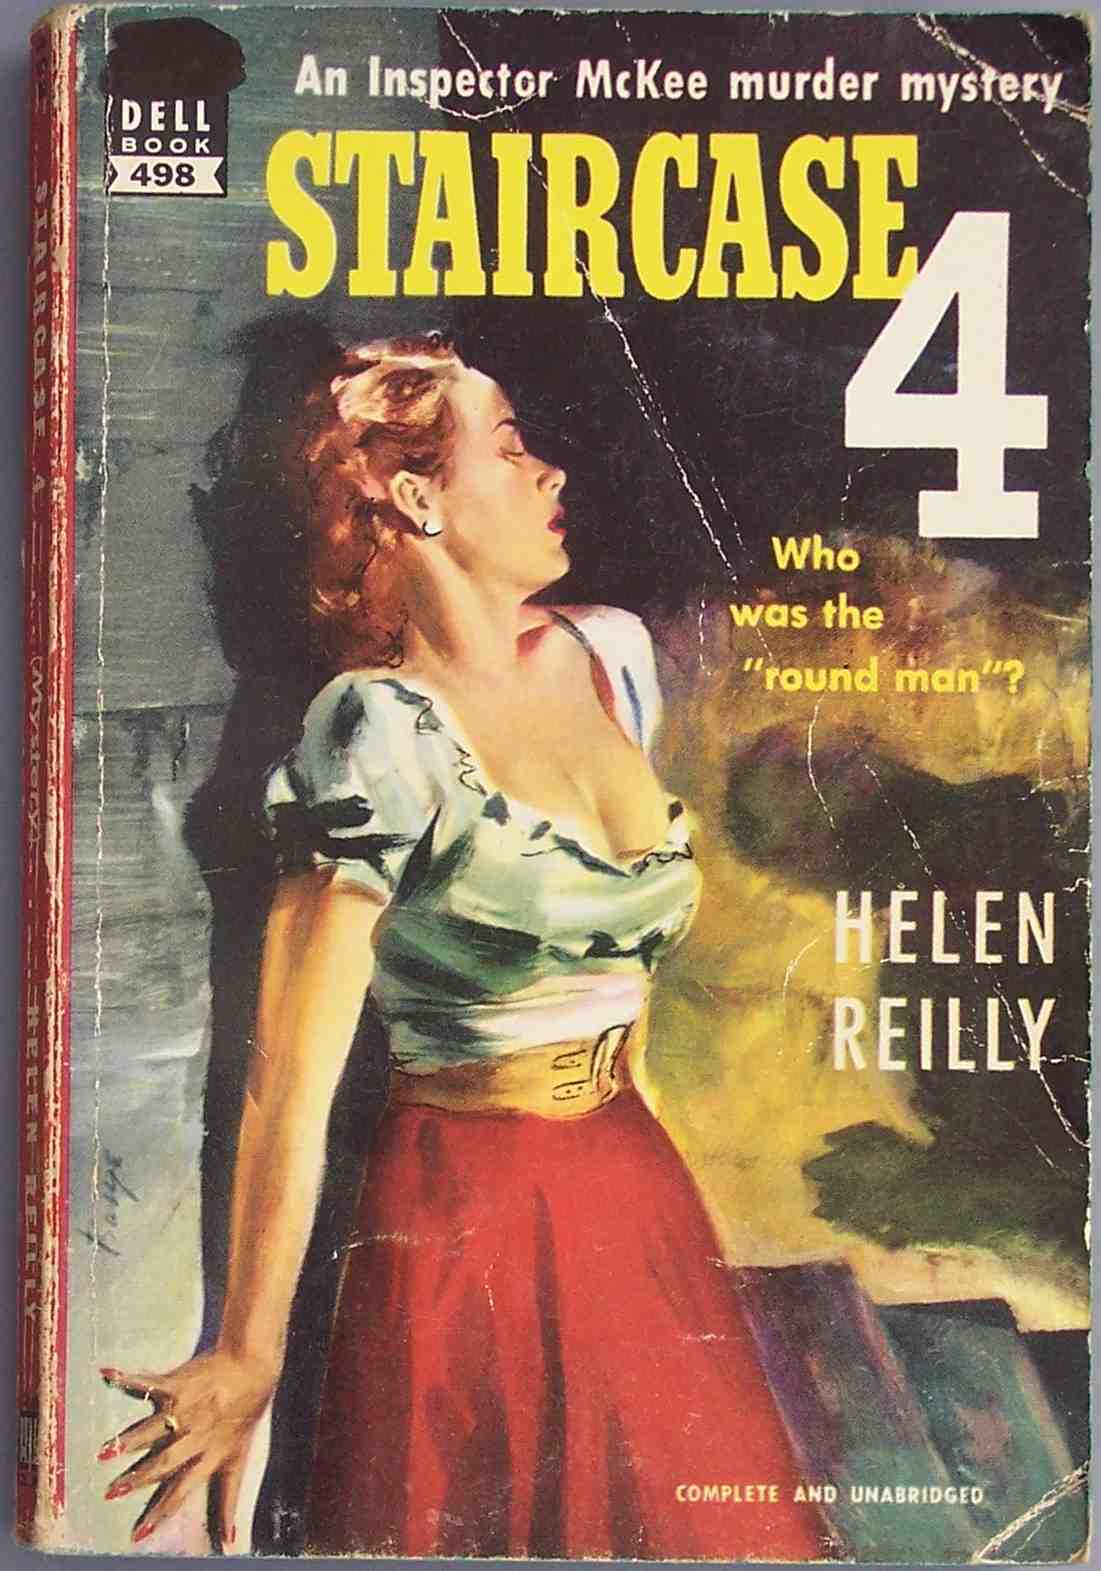 the cover of an old paperback of the book staircase 4